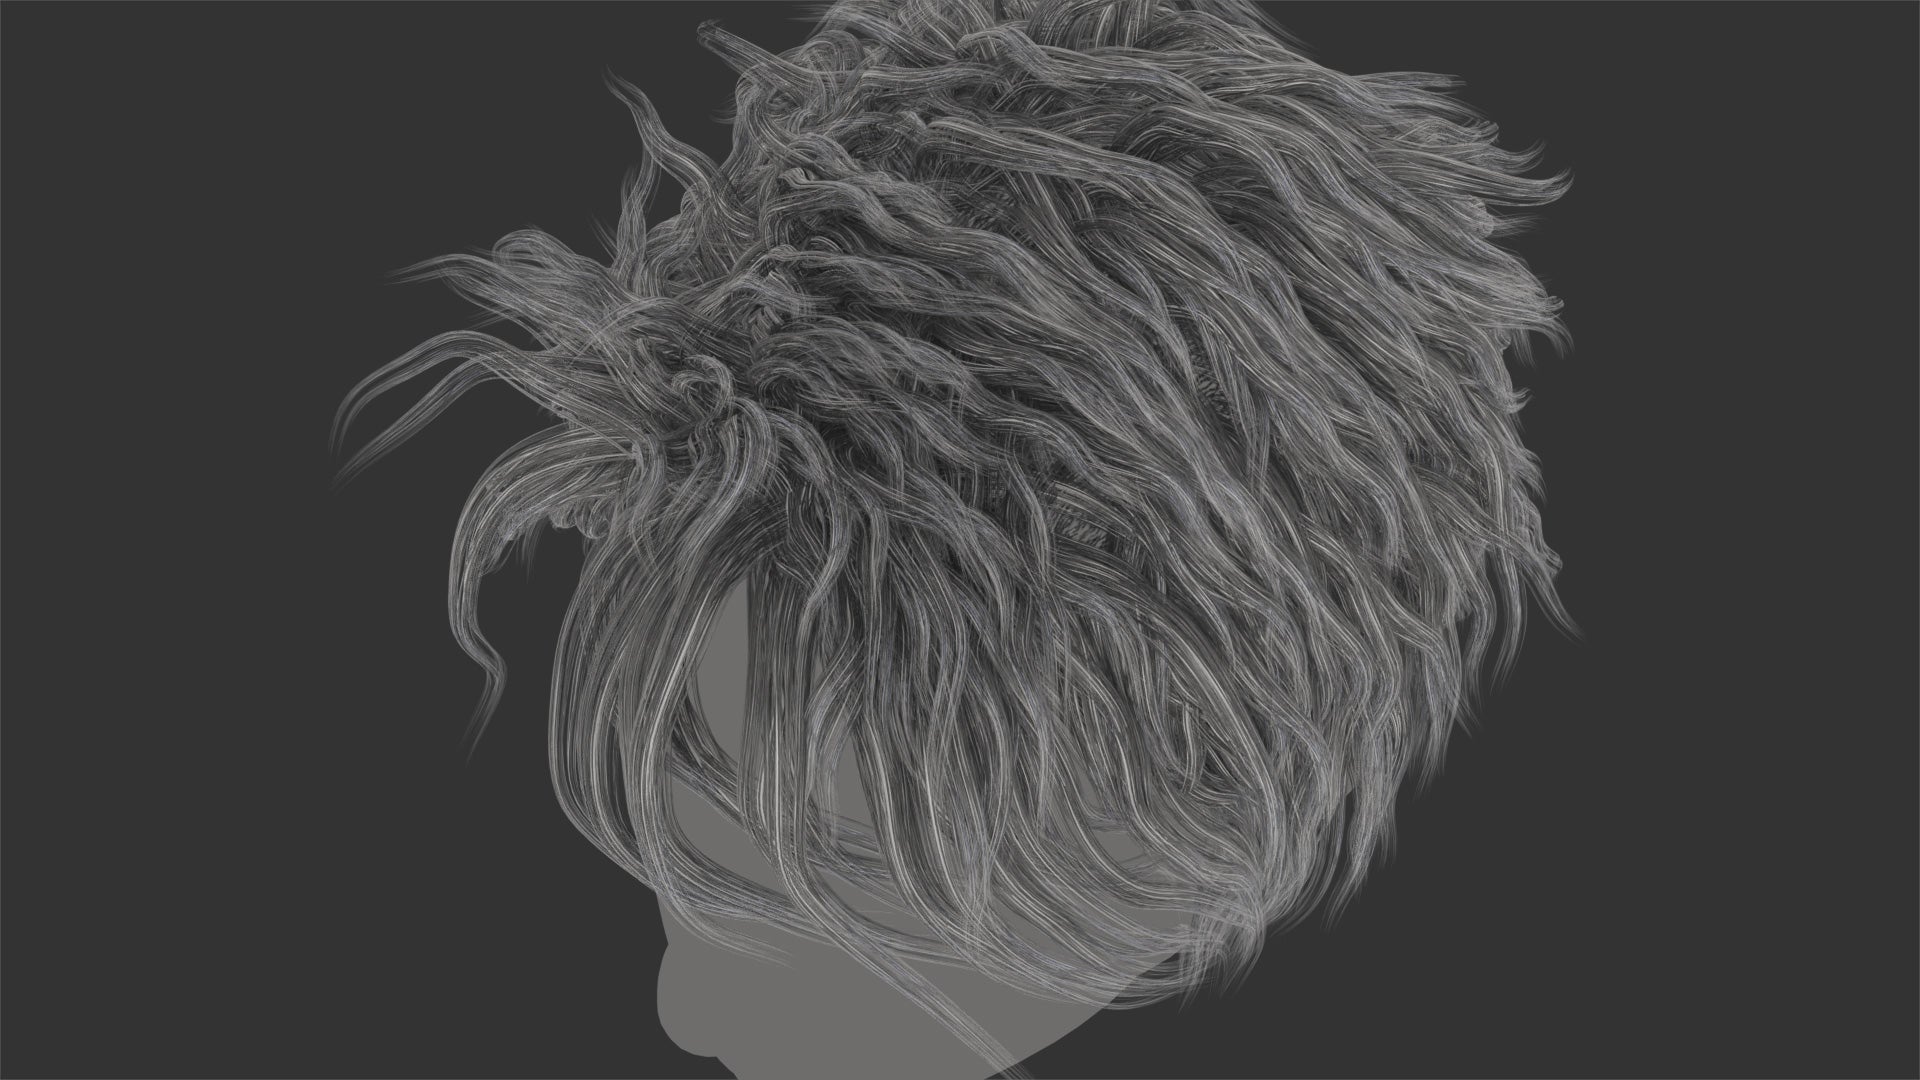 3d model of a cool and messy hair style, made with mesh cards, low polycount, and PBR textures